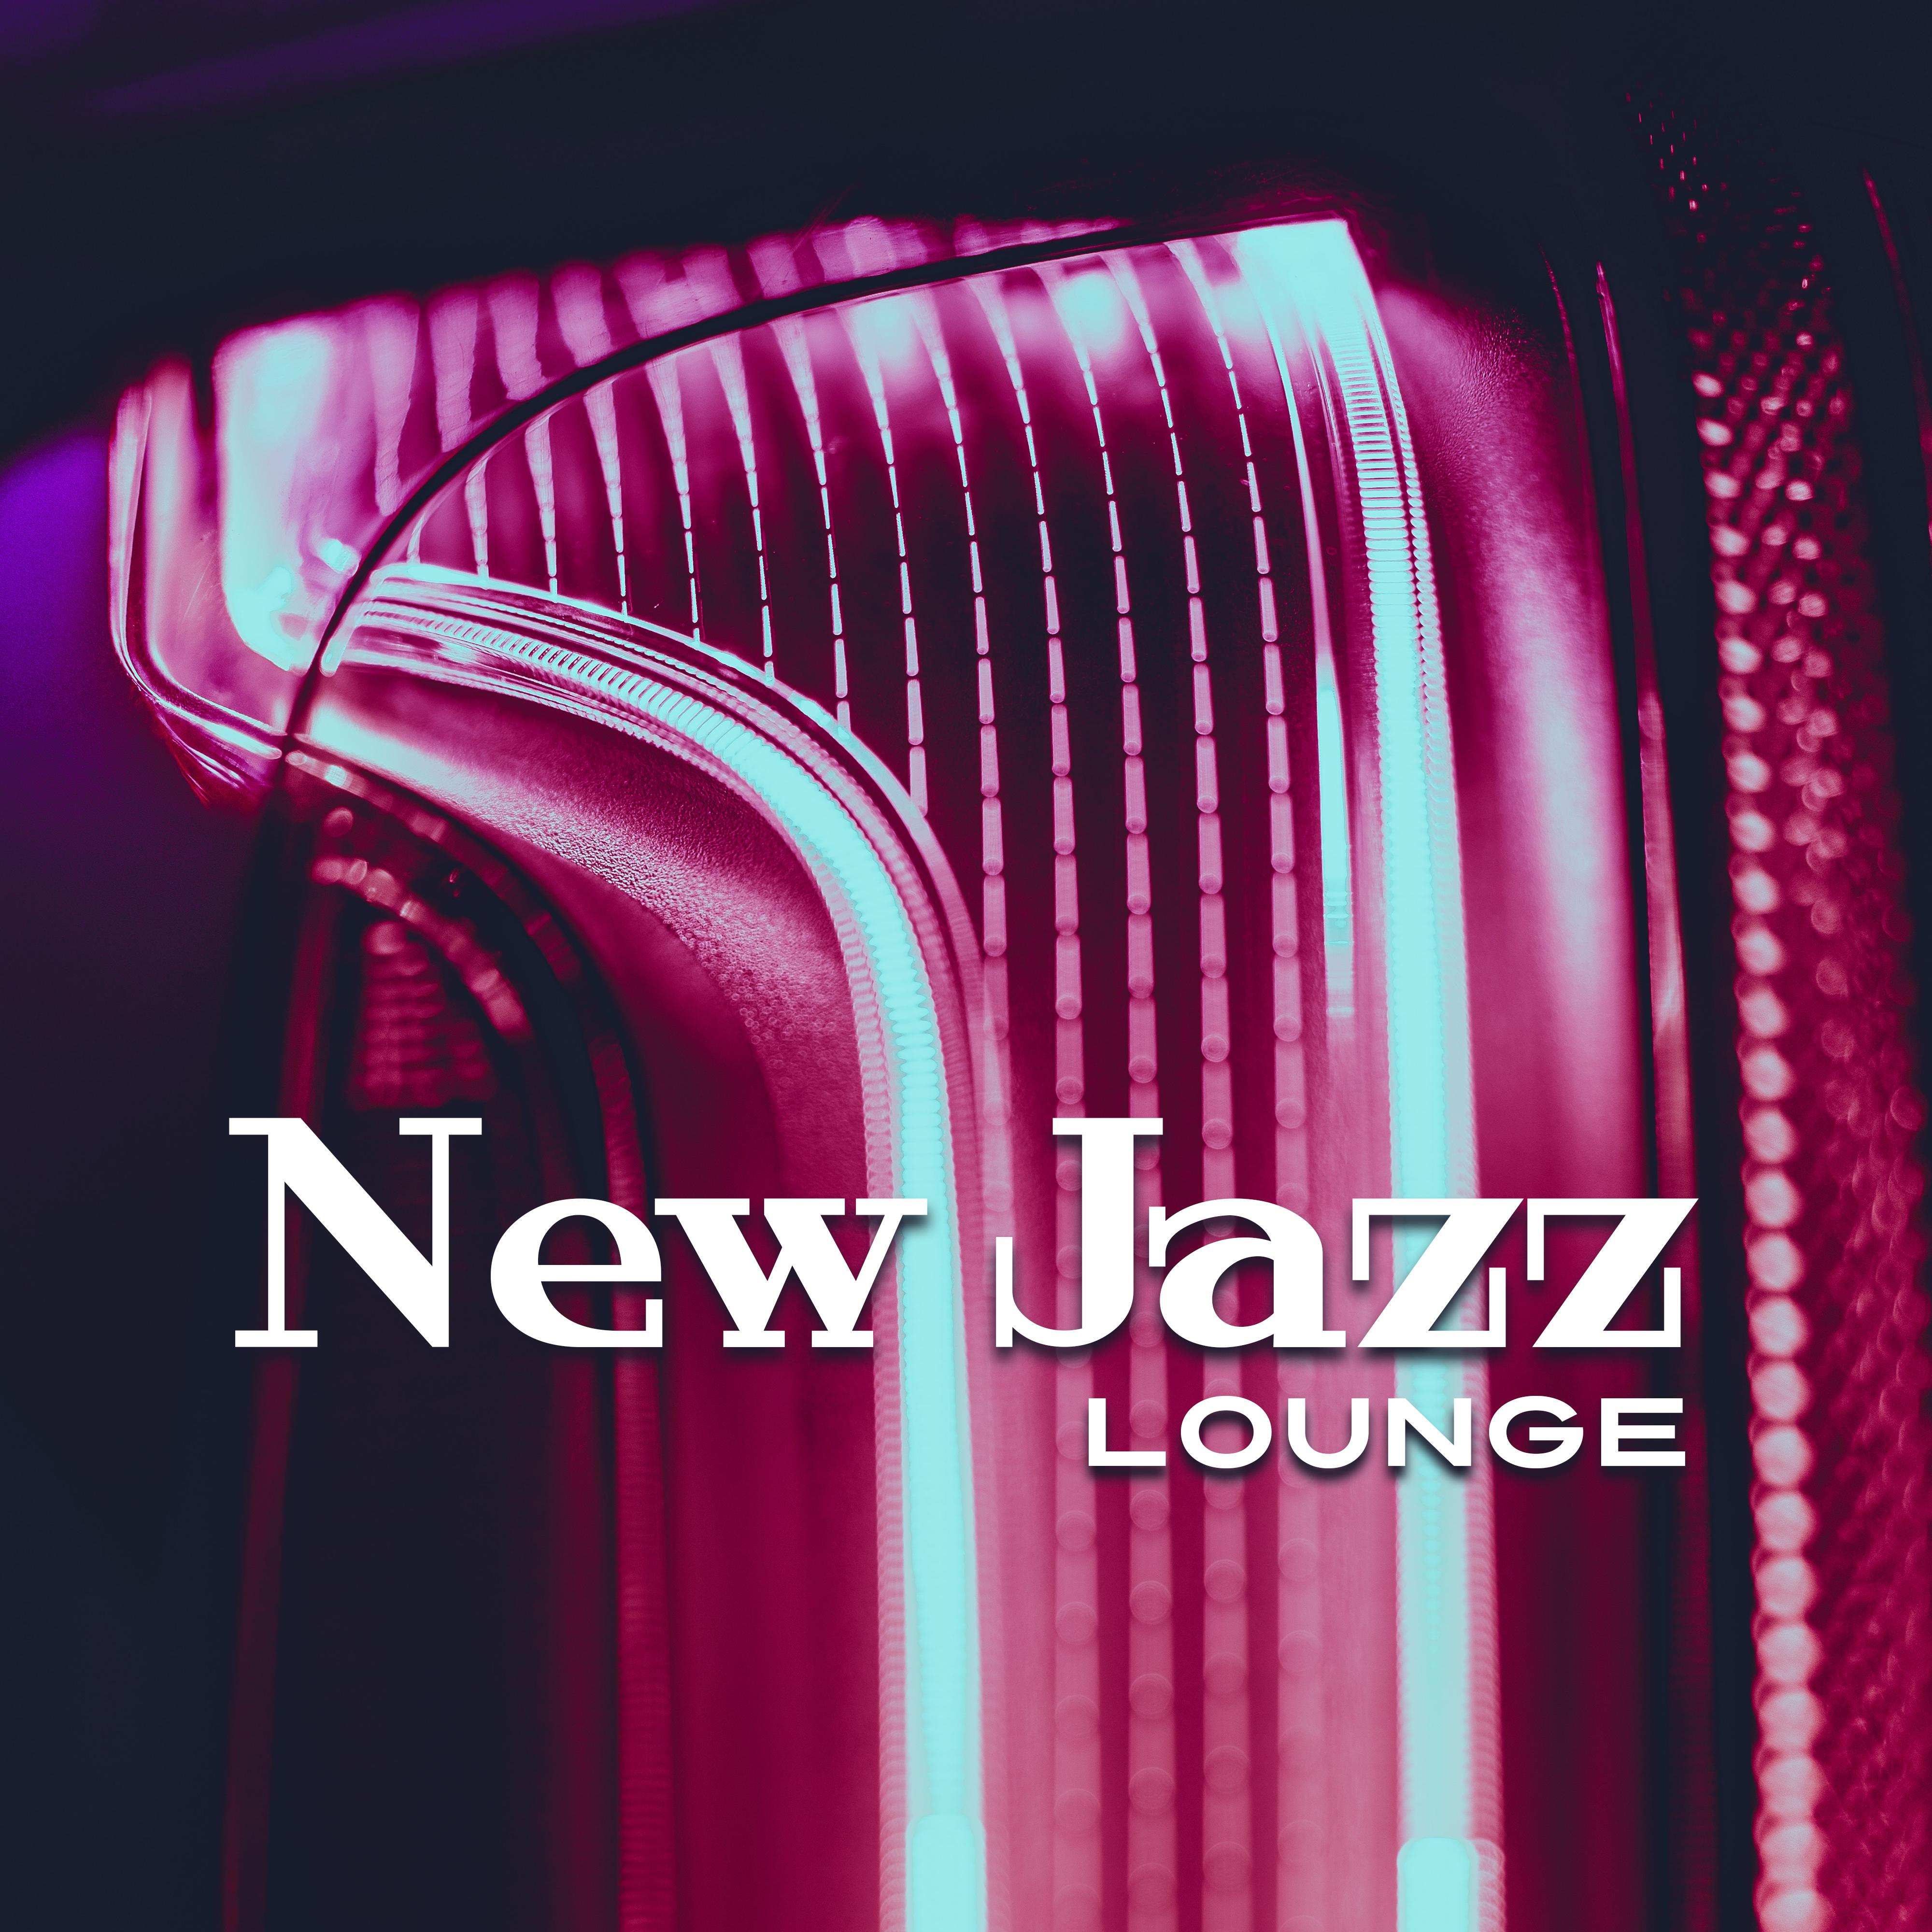 New Jazz Lounge  Smooth Jazz, Instrumental Ambient, Relaxed Jazz, Ambient Piano Session